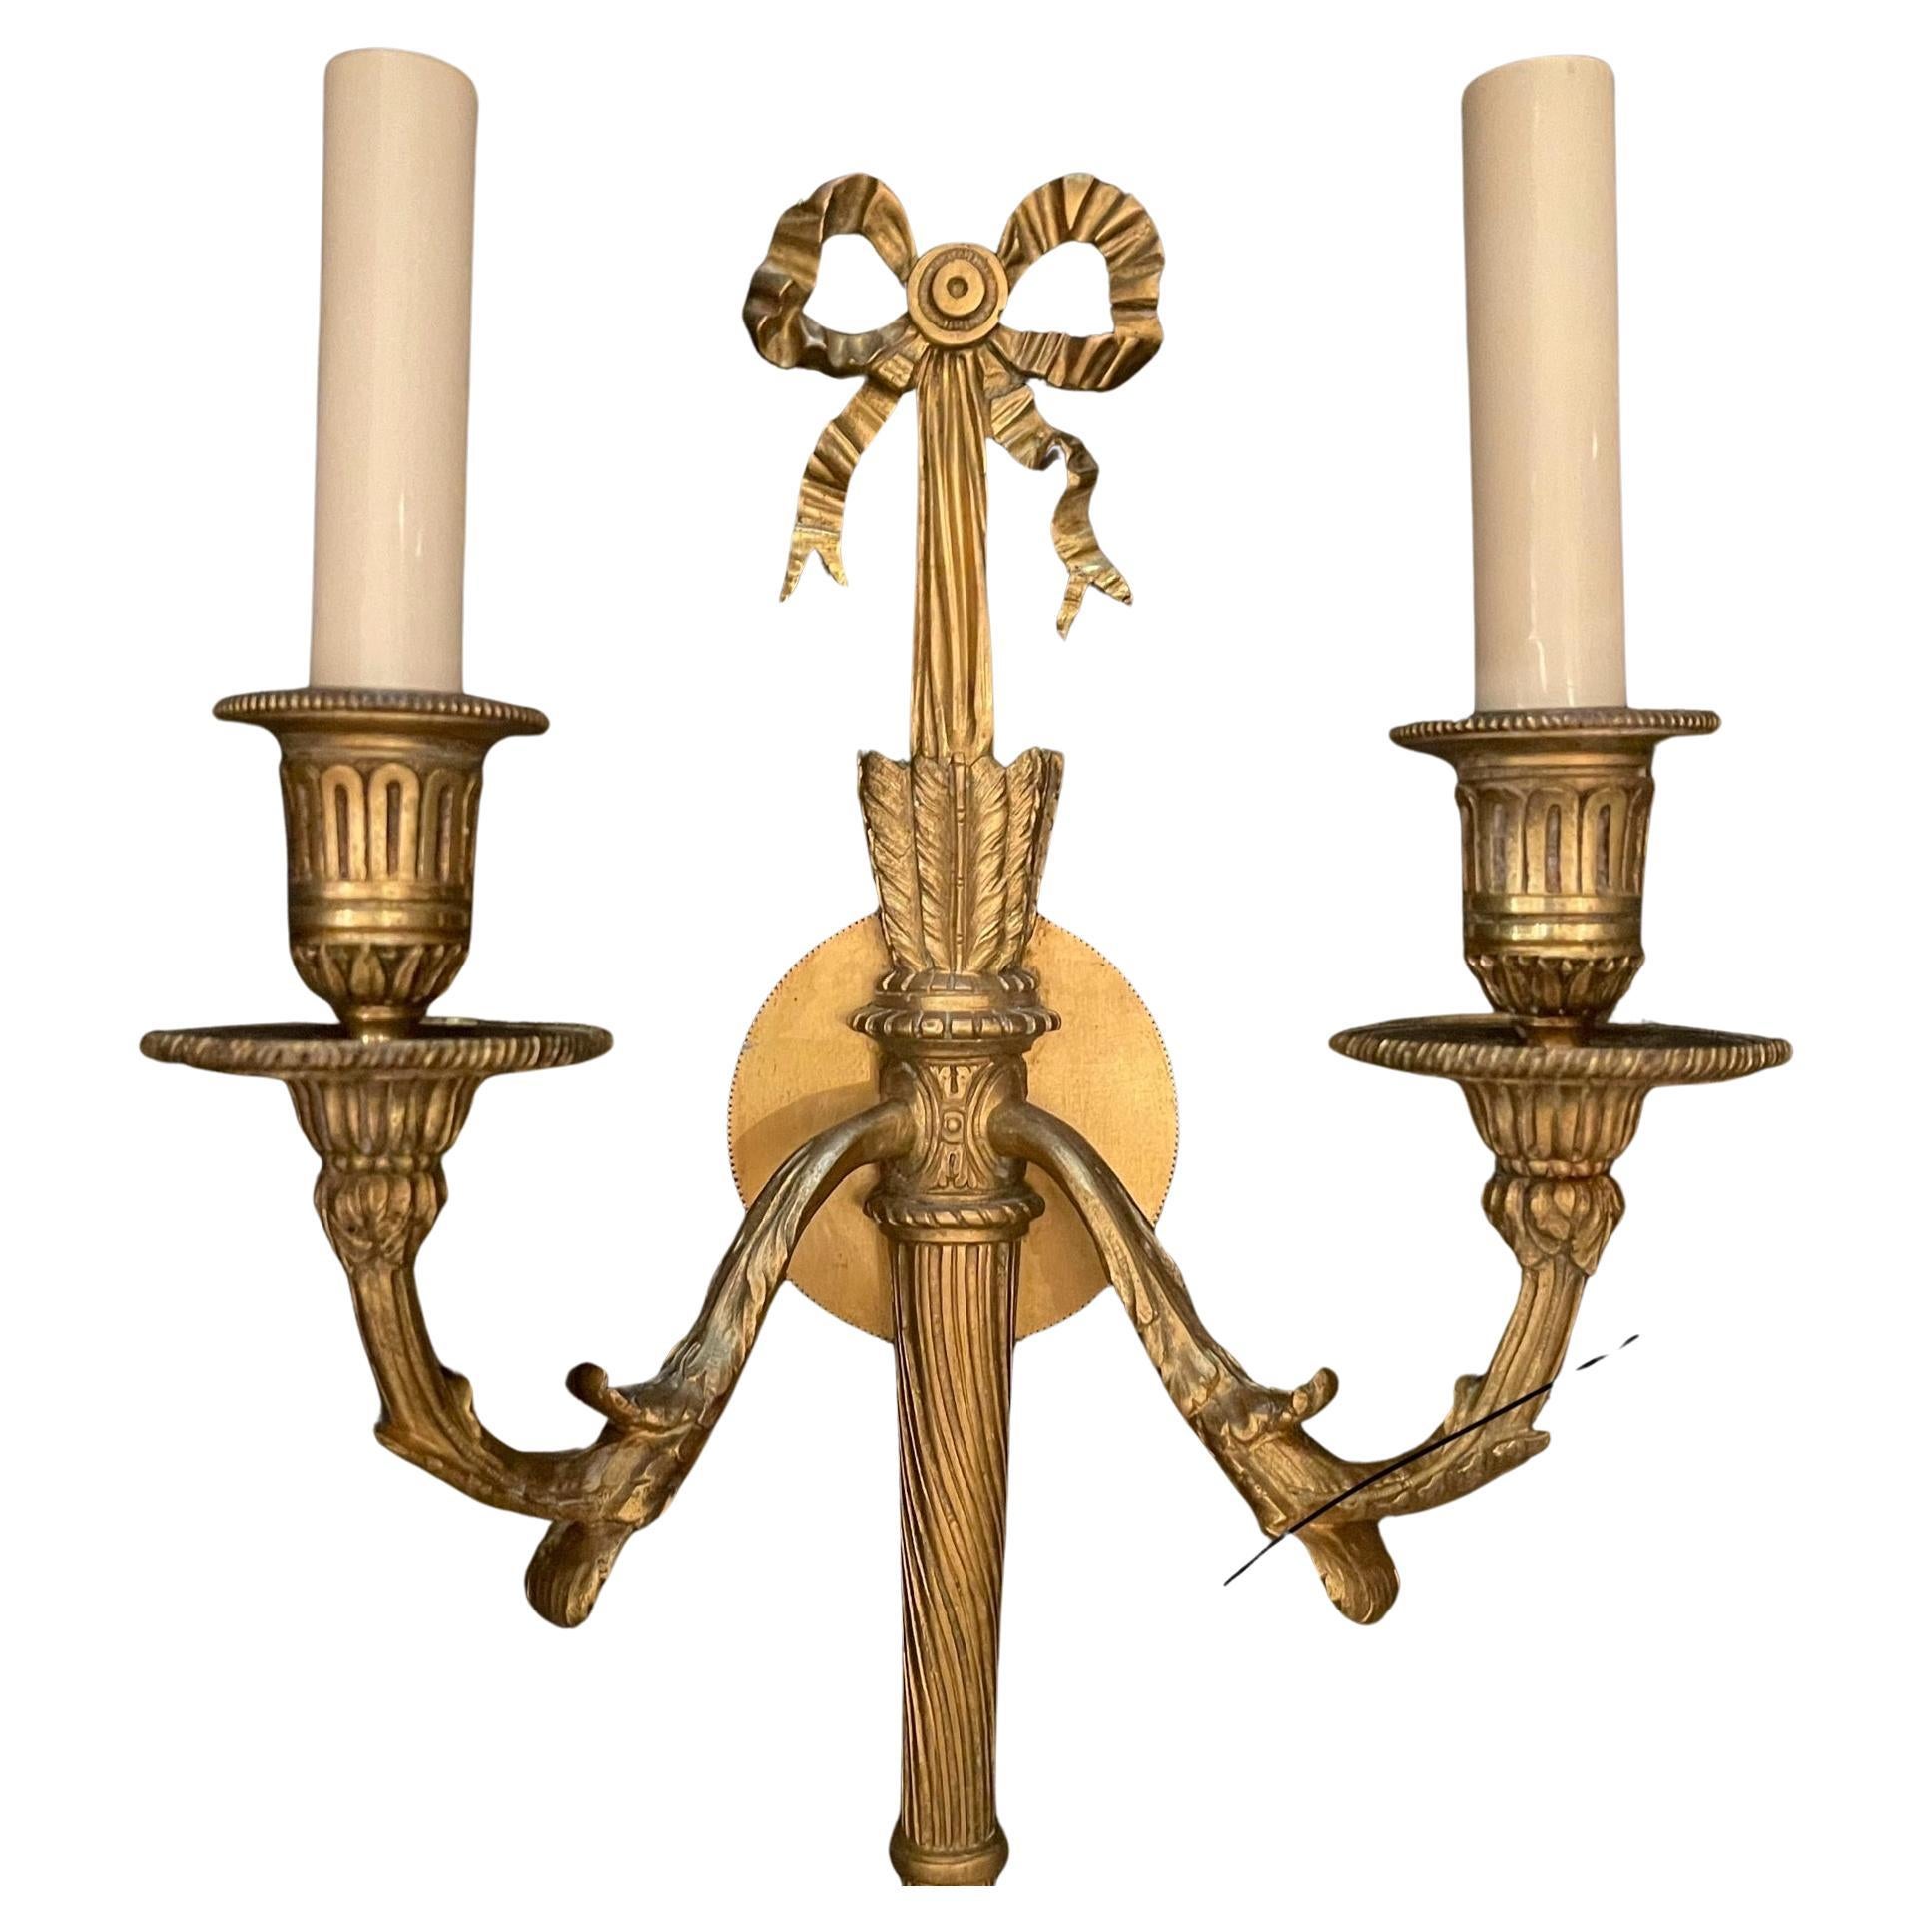 A wonderful pair of French gilt doré bronze bow top and back plate, torchiere two-light neoclassical sconces in the manner / style of E.F. Caldwell.
Completely rewired and ready to install and enjoy.
Approximate measurements:
15.5